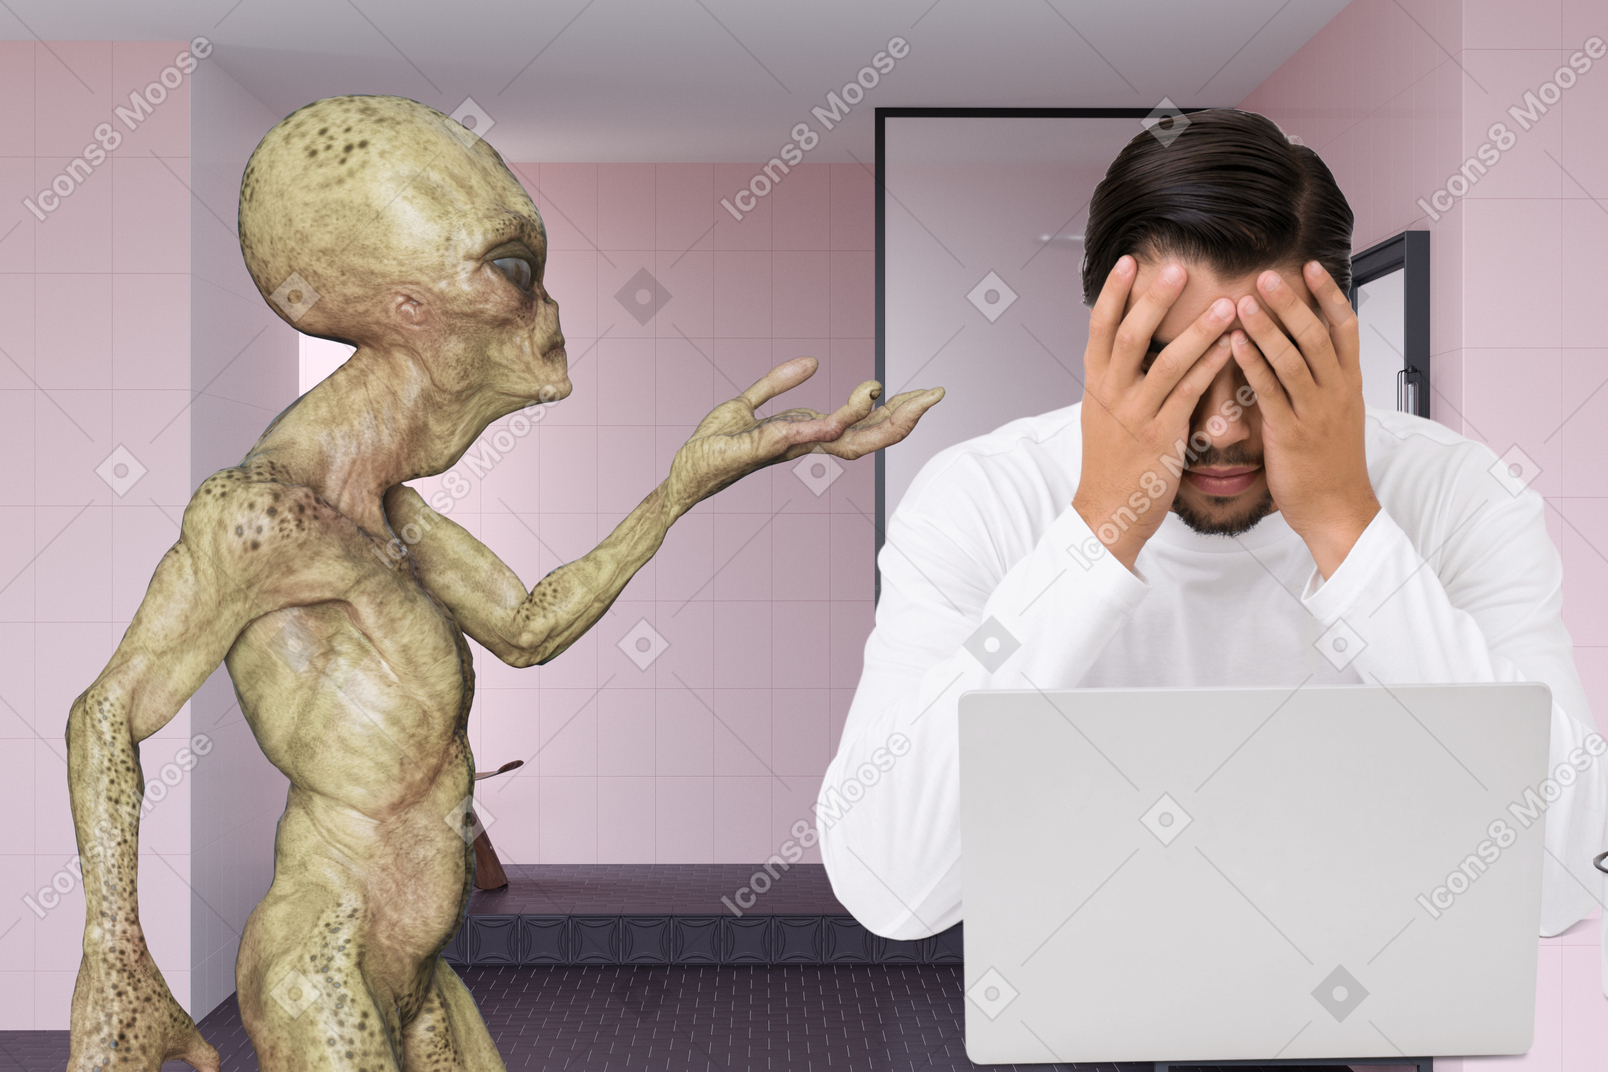 Alien standing next to frustrated man with laptop